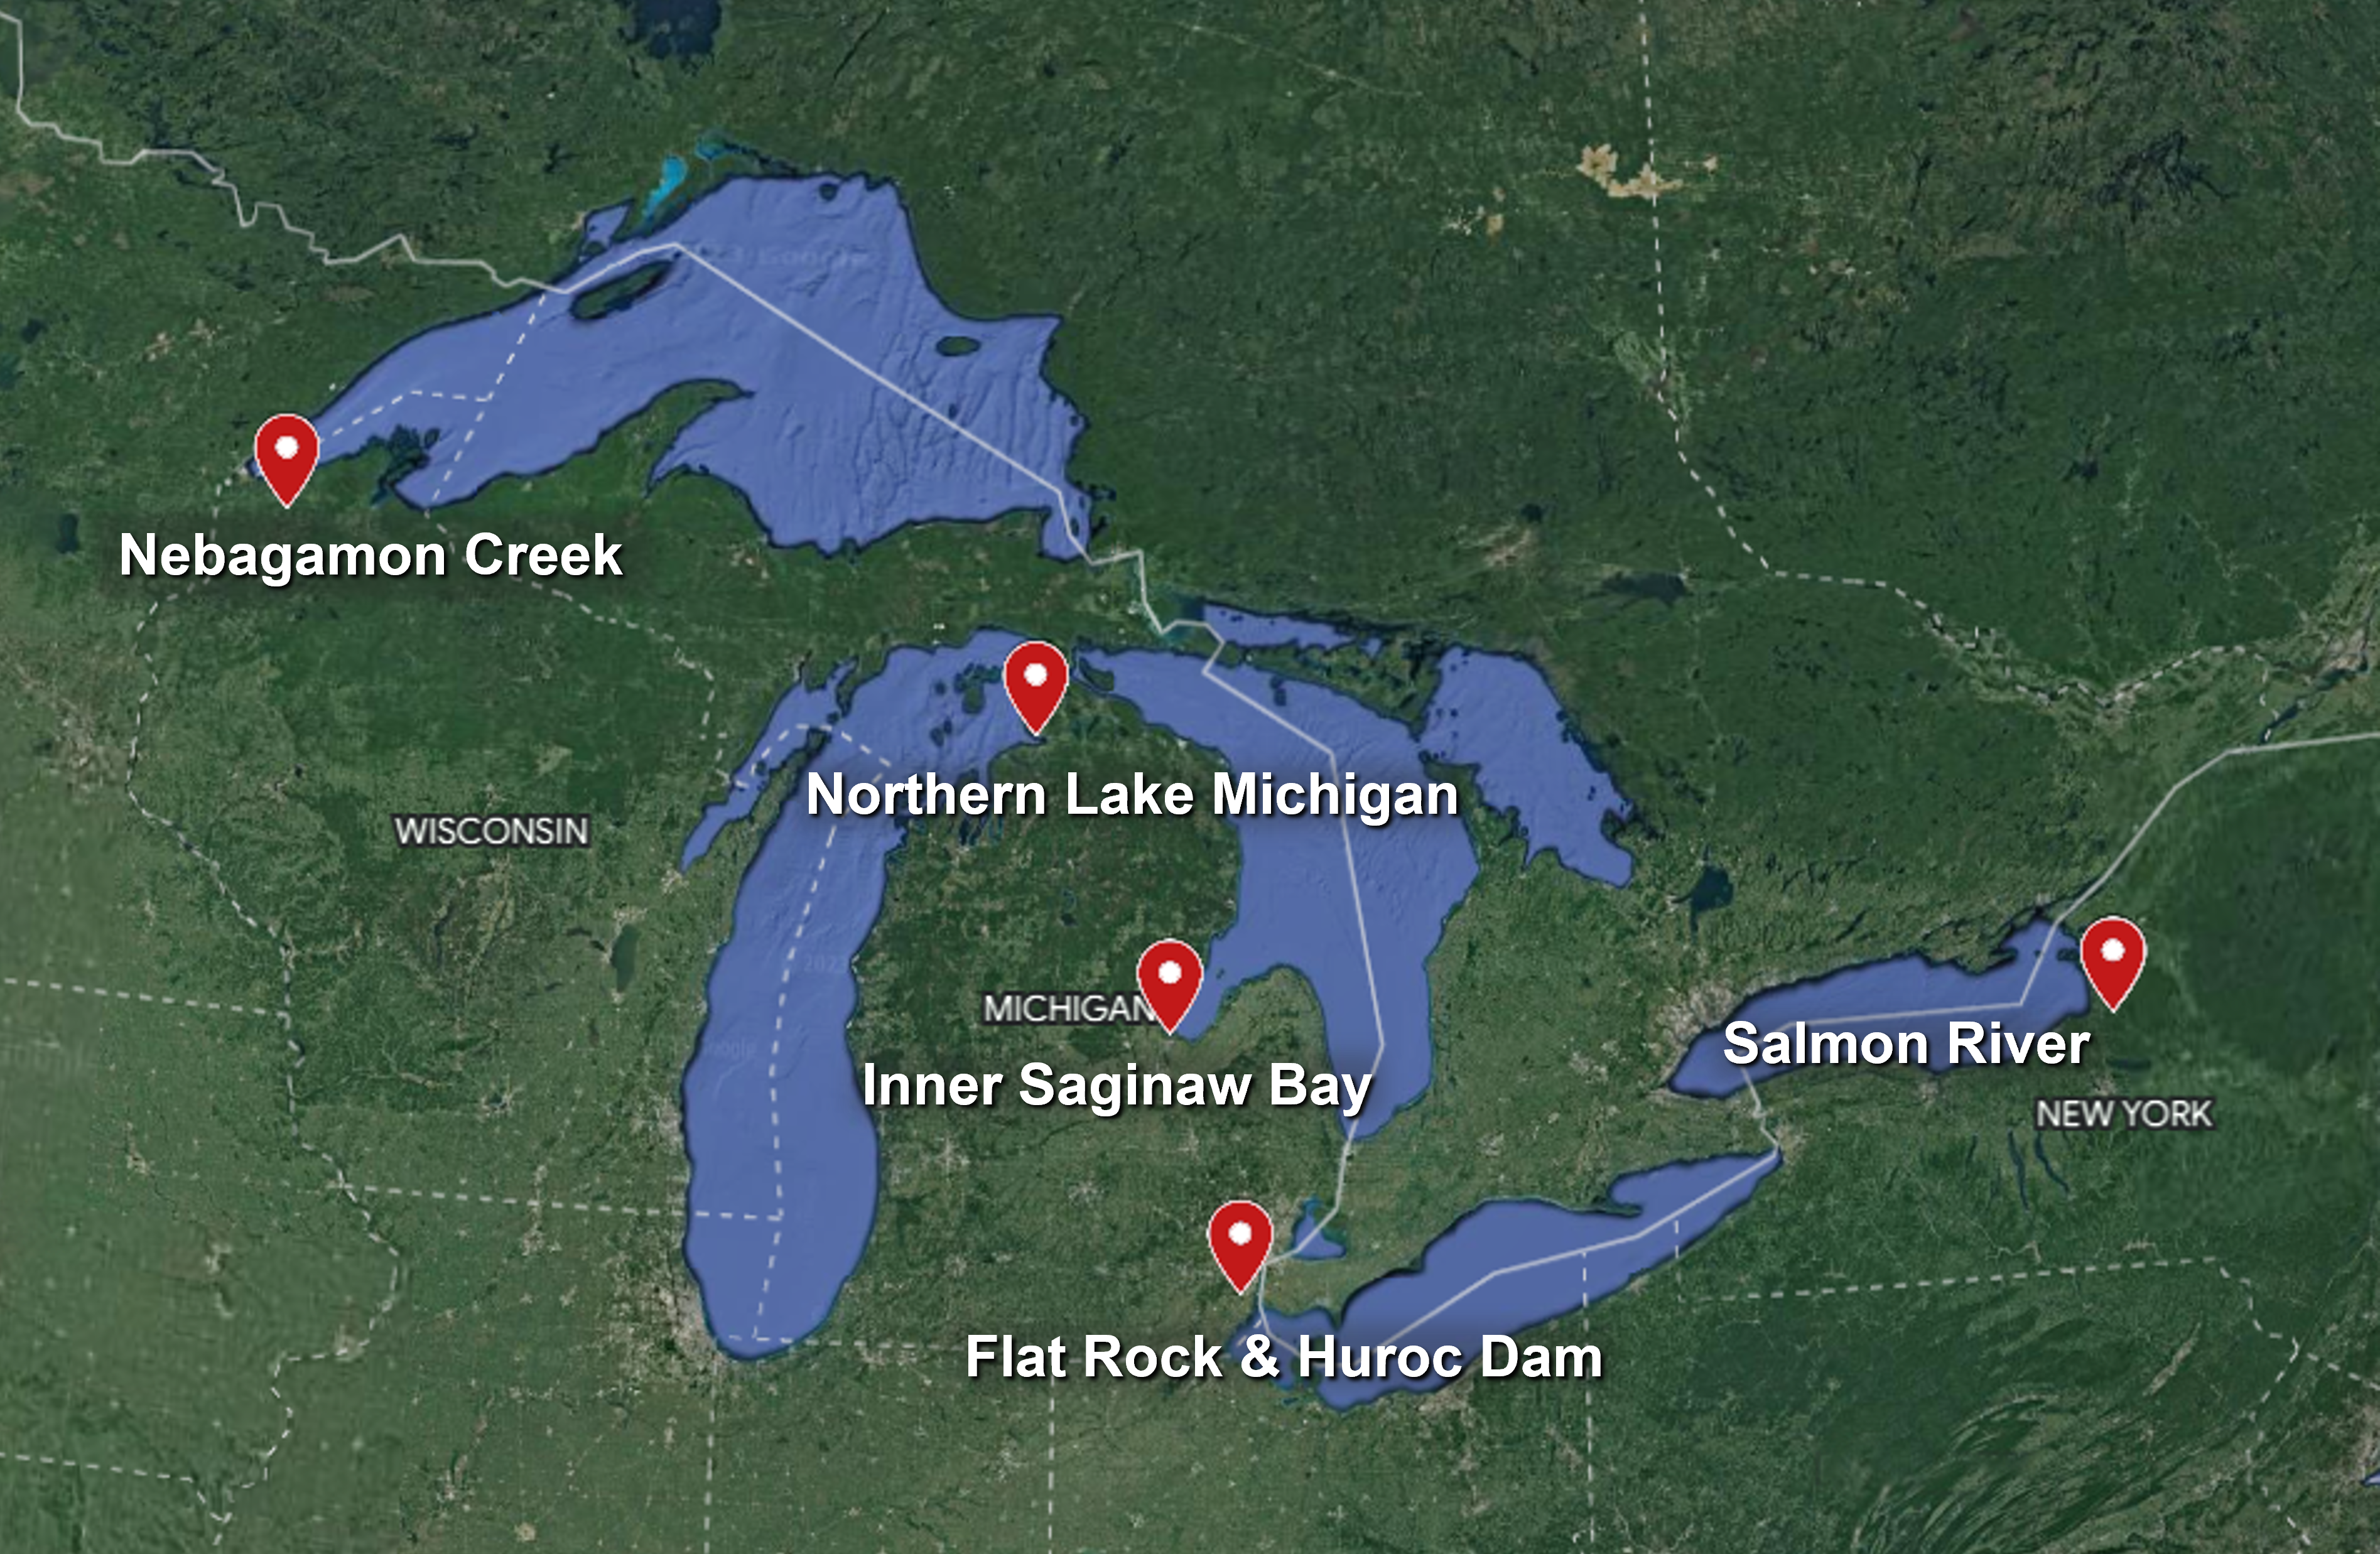 A map of the Great Lakes with five locations noted: Nebagamon Creek, Northern Lake Michigan, Inner Saginaw Bay, Flat Rock & Huroc Dam, and the Salmon River.